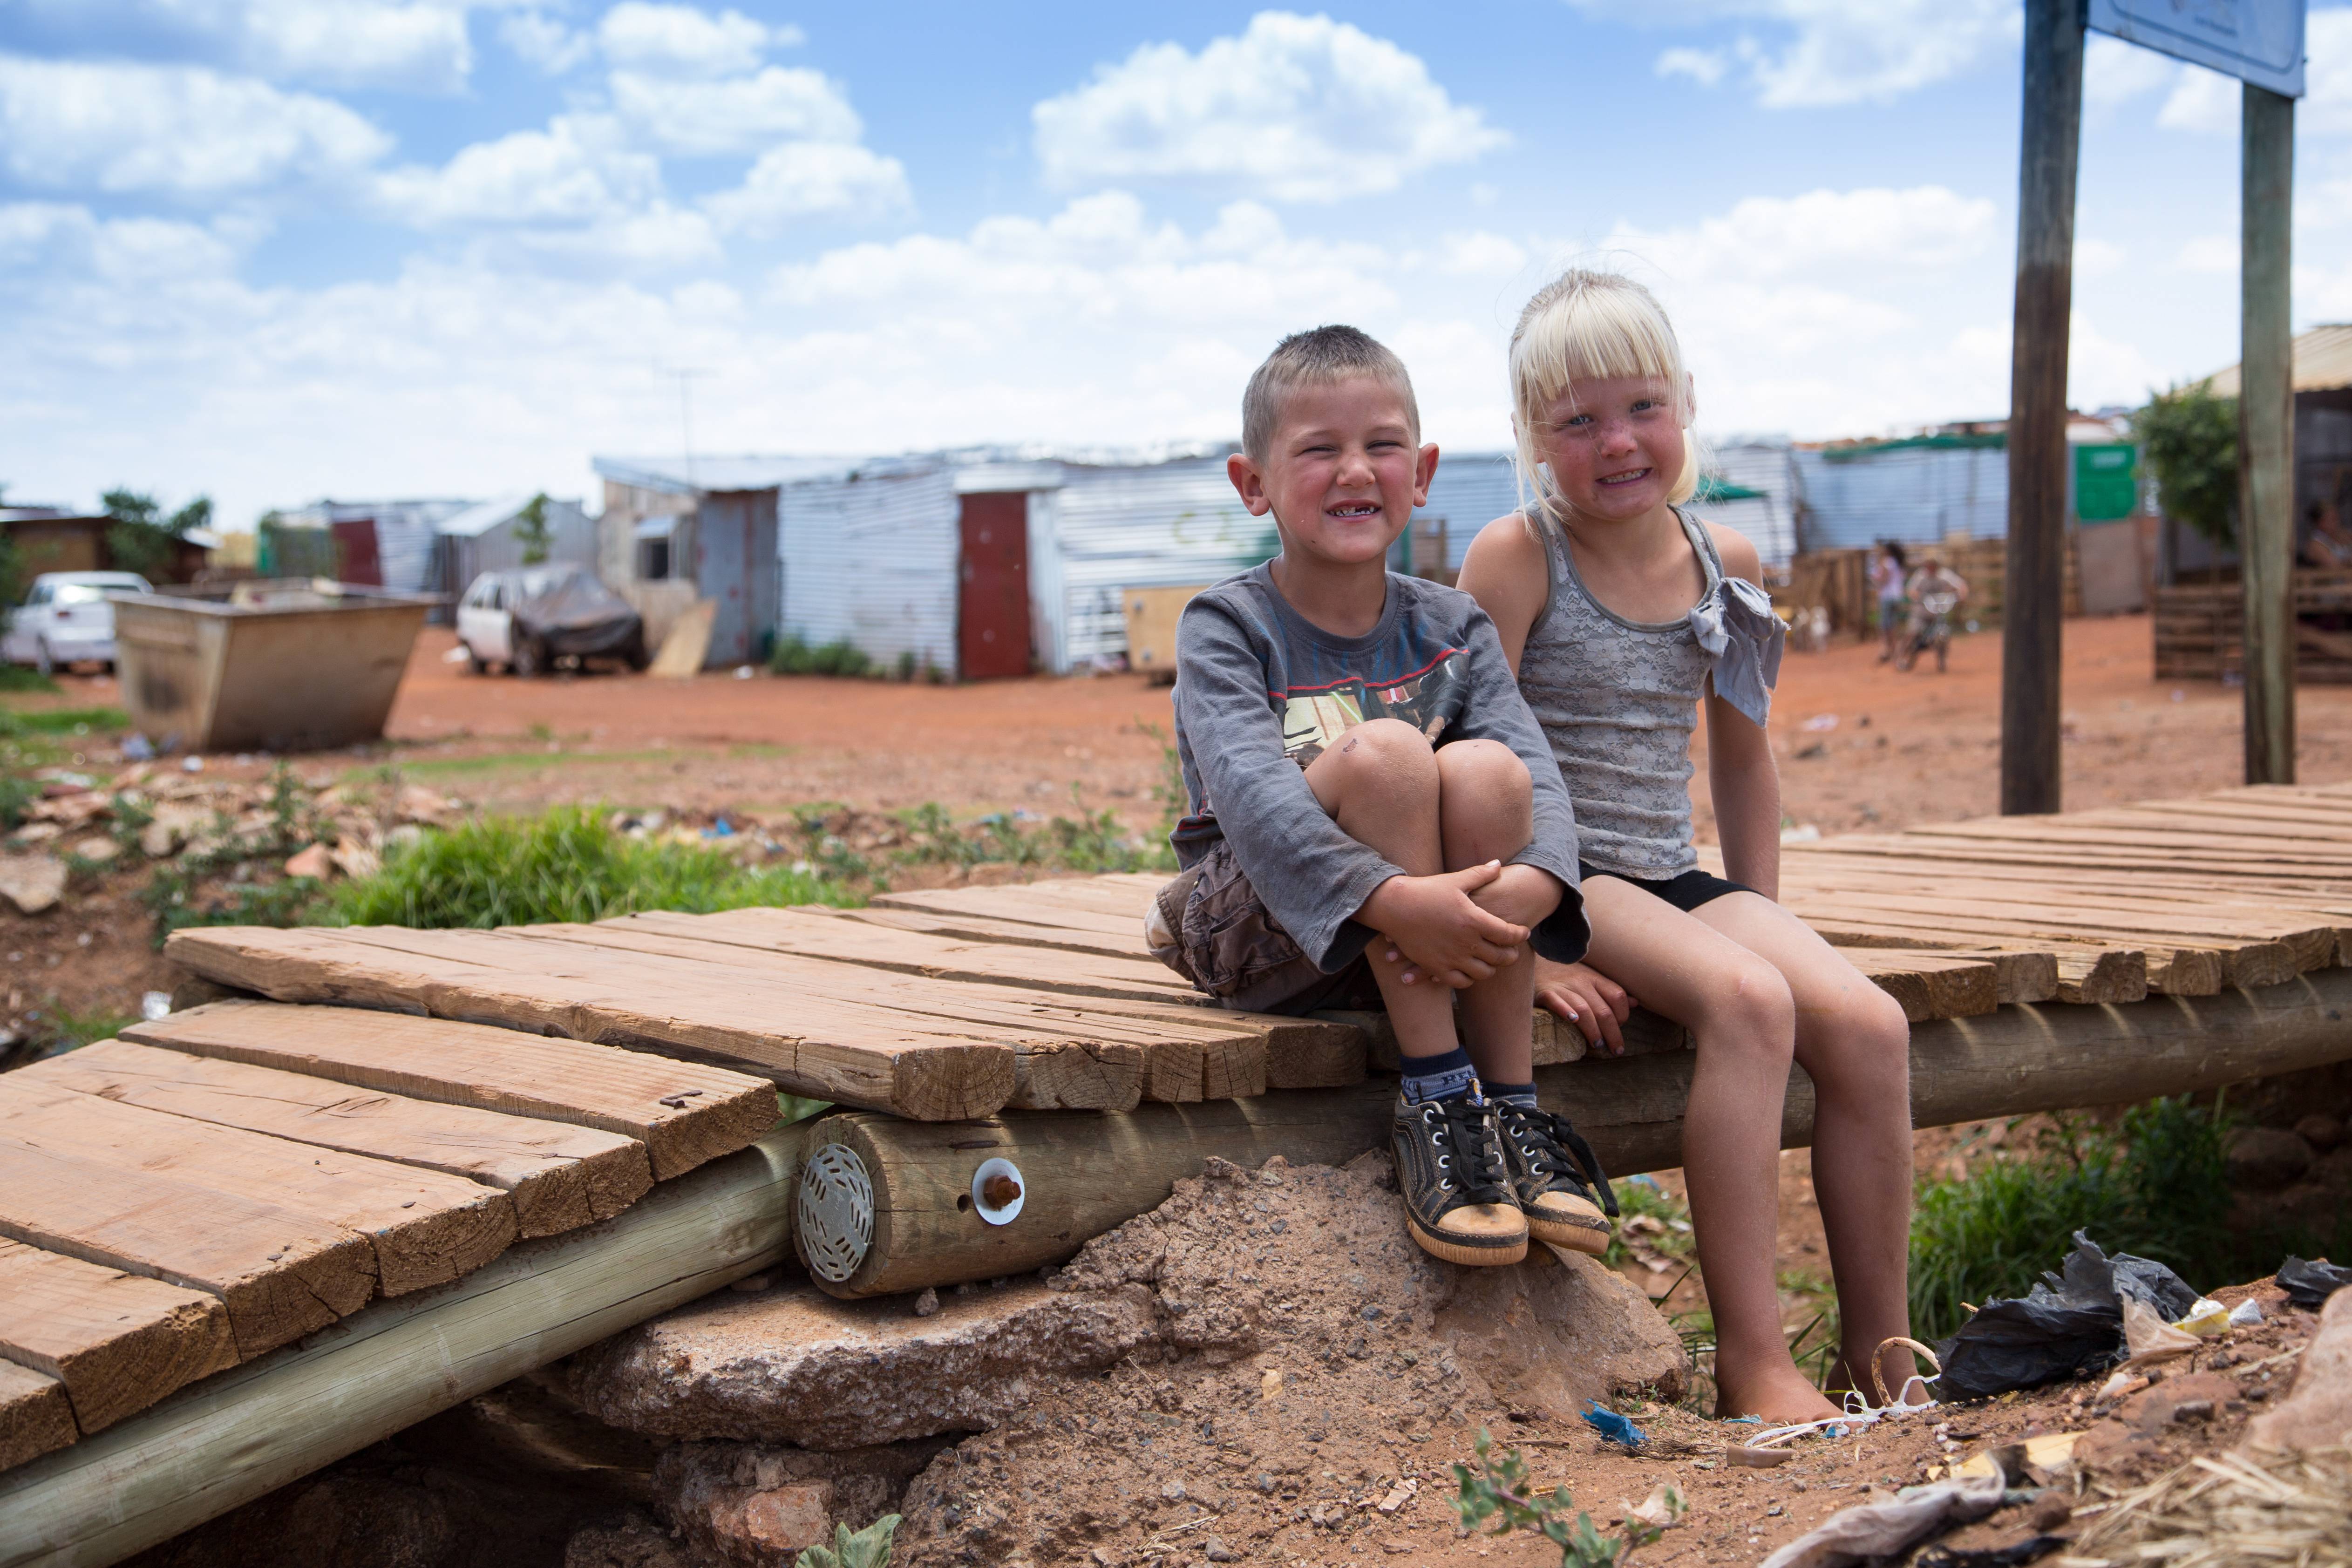 Poor White South African Kids in Shanty Towns